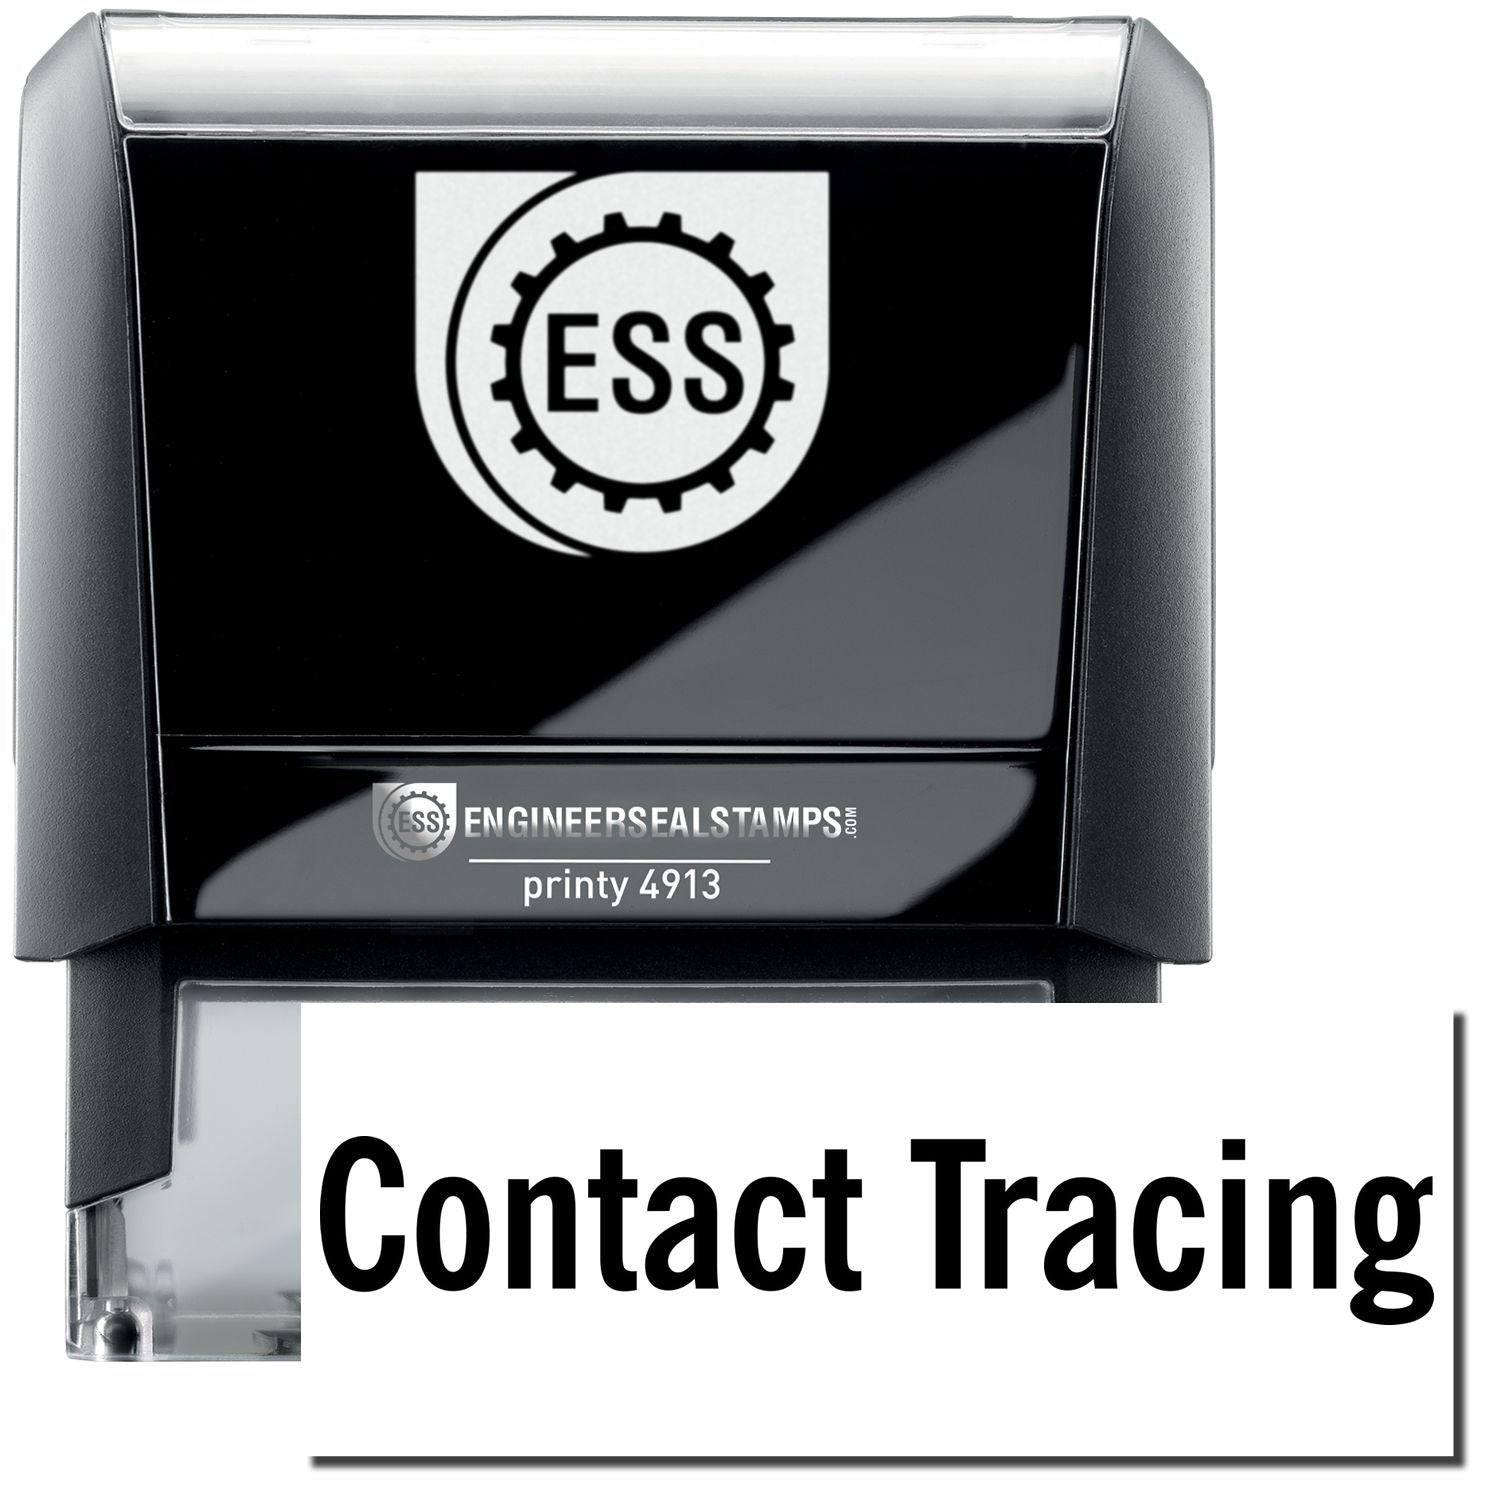 A self-inking stamp with a stamped image showing how the text "Contact Tracing" in a large font is displayed by it after stamping.